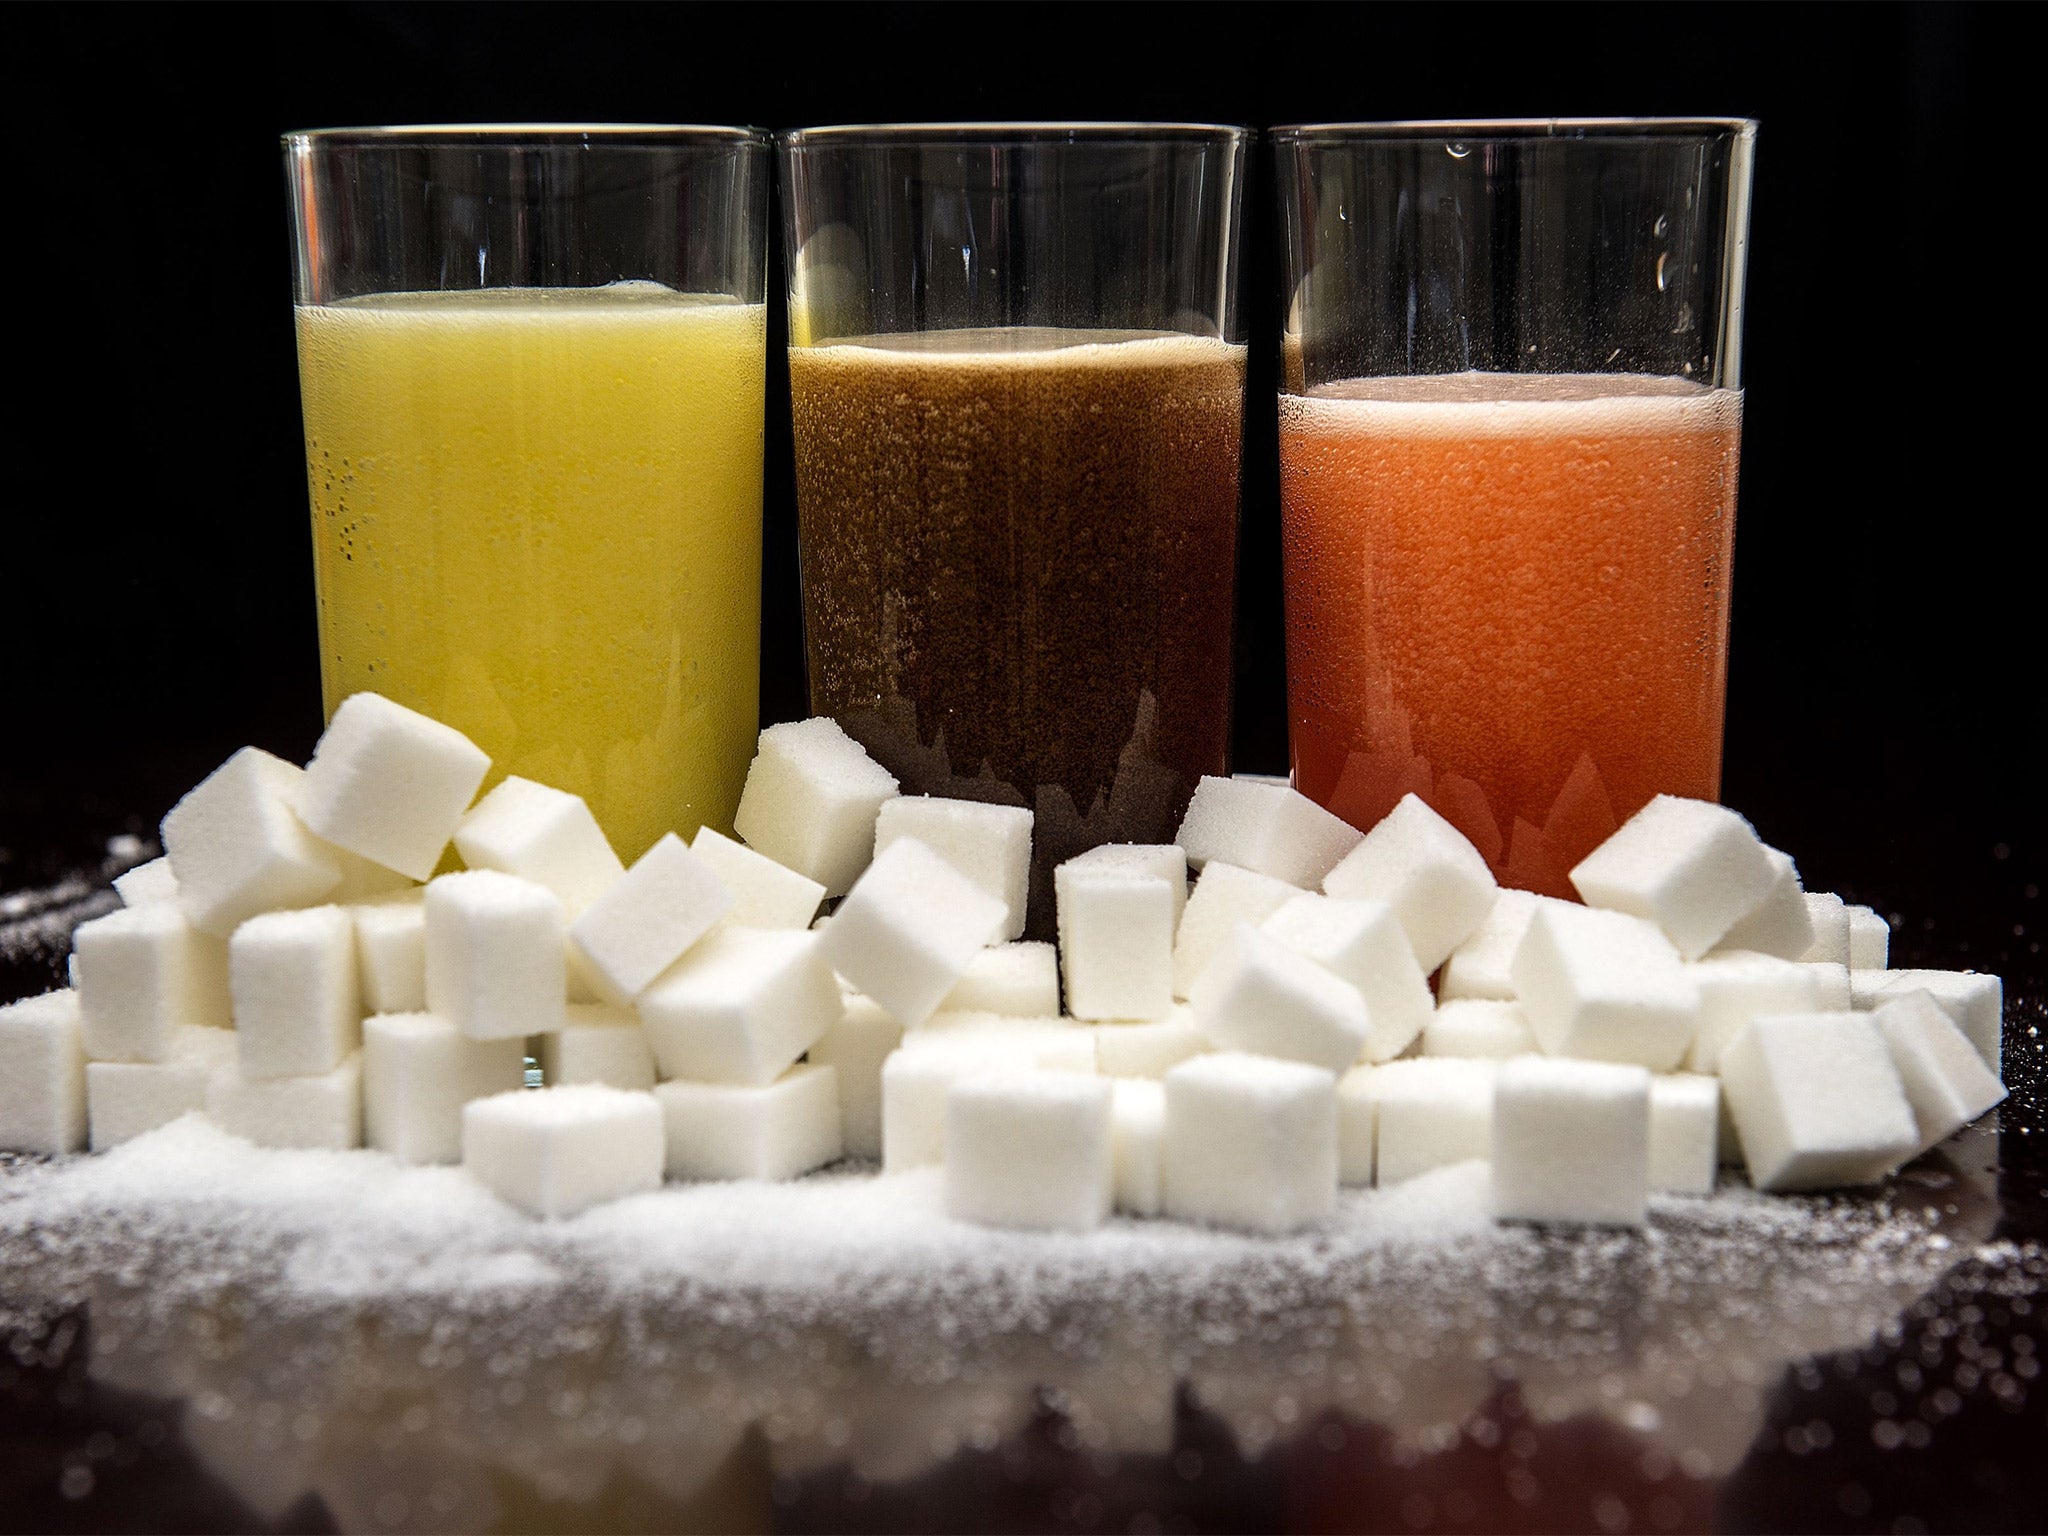 George Osborne announced a sugar tax on the soft drinks industry earlier this month